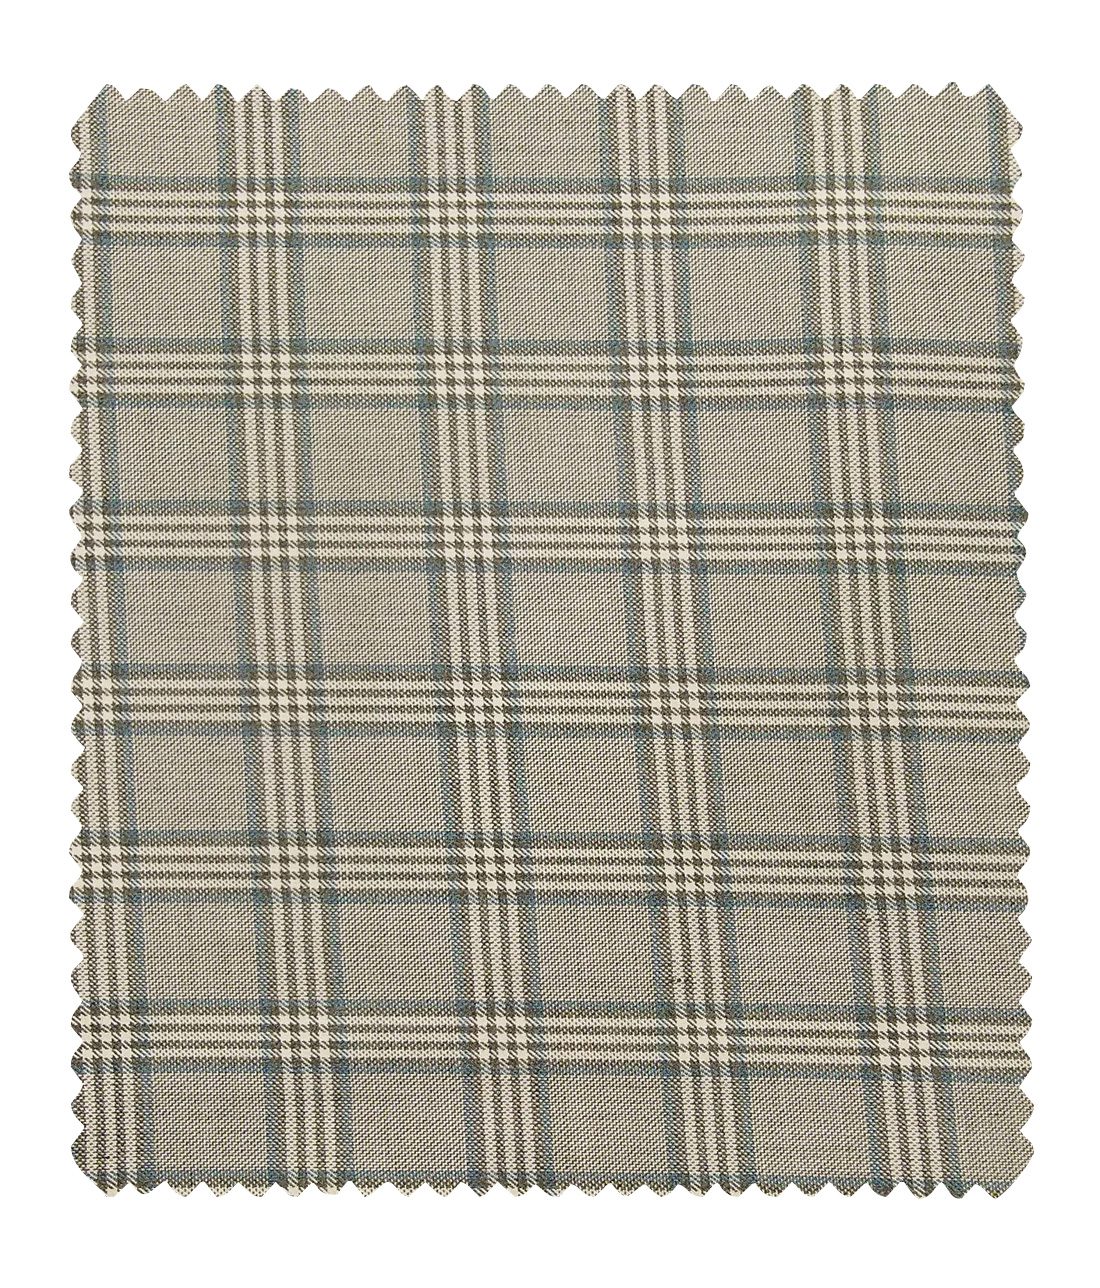 Donear Men's Checks Terry Rayon Unstitched Suiting Fabric (Beigish Grey)